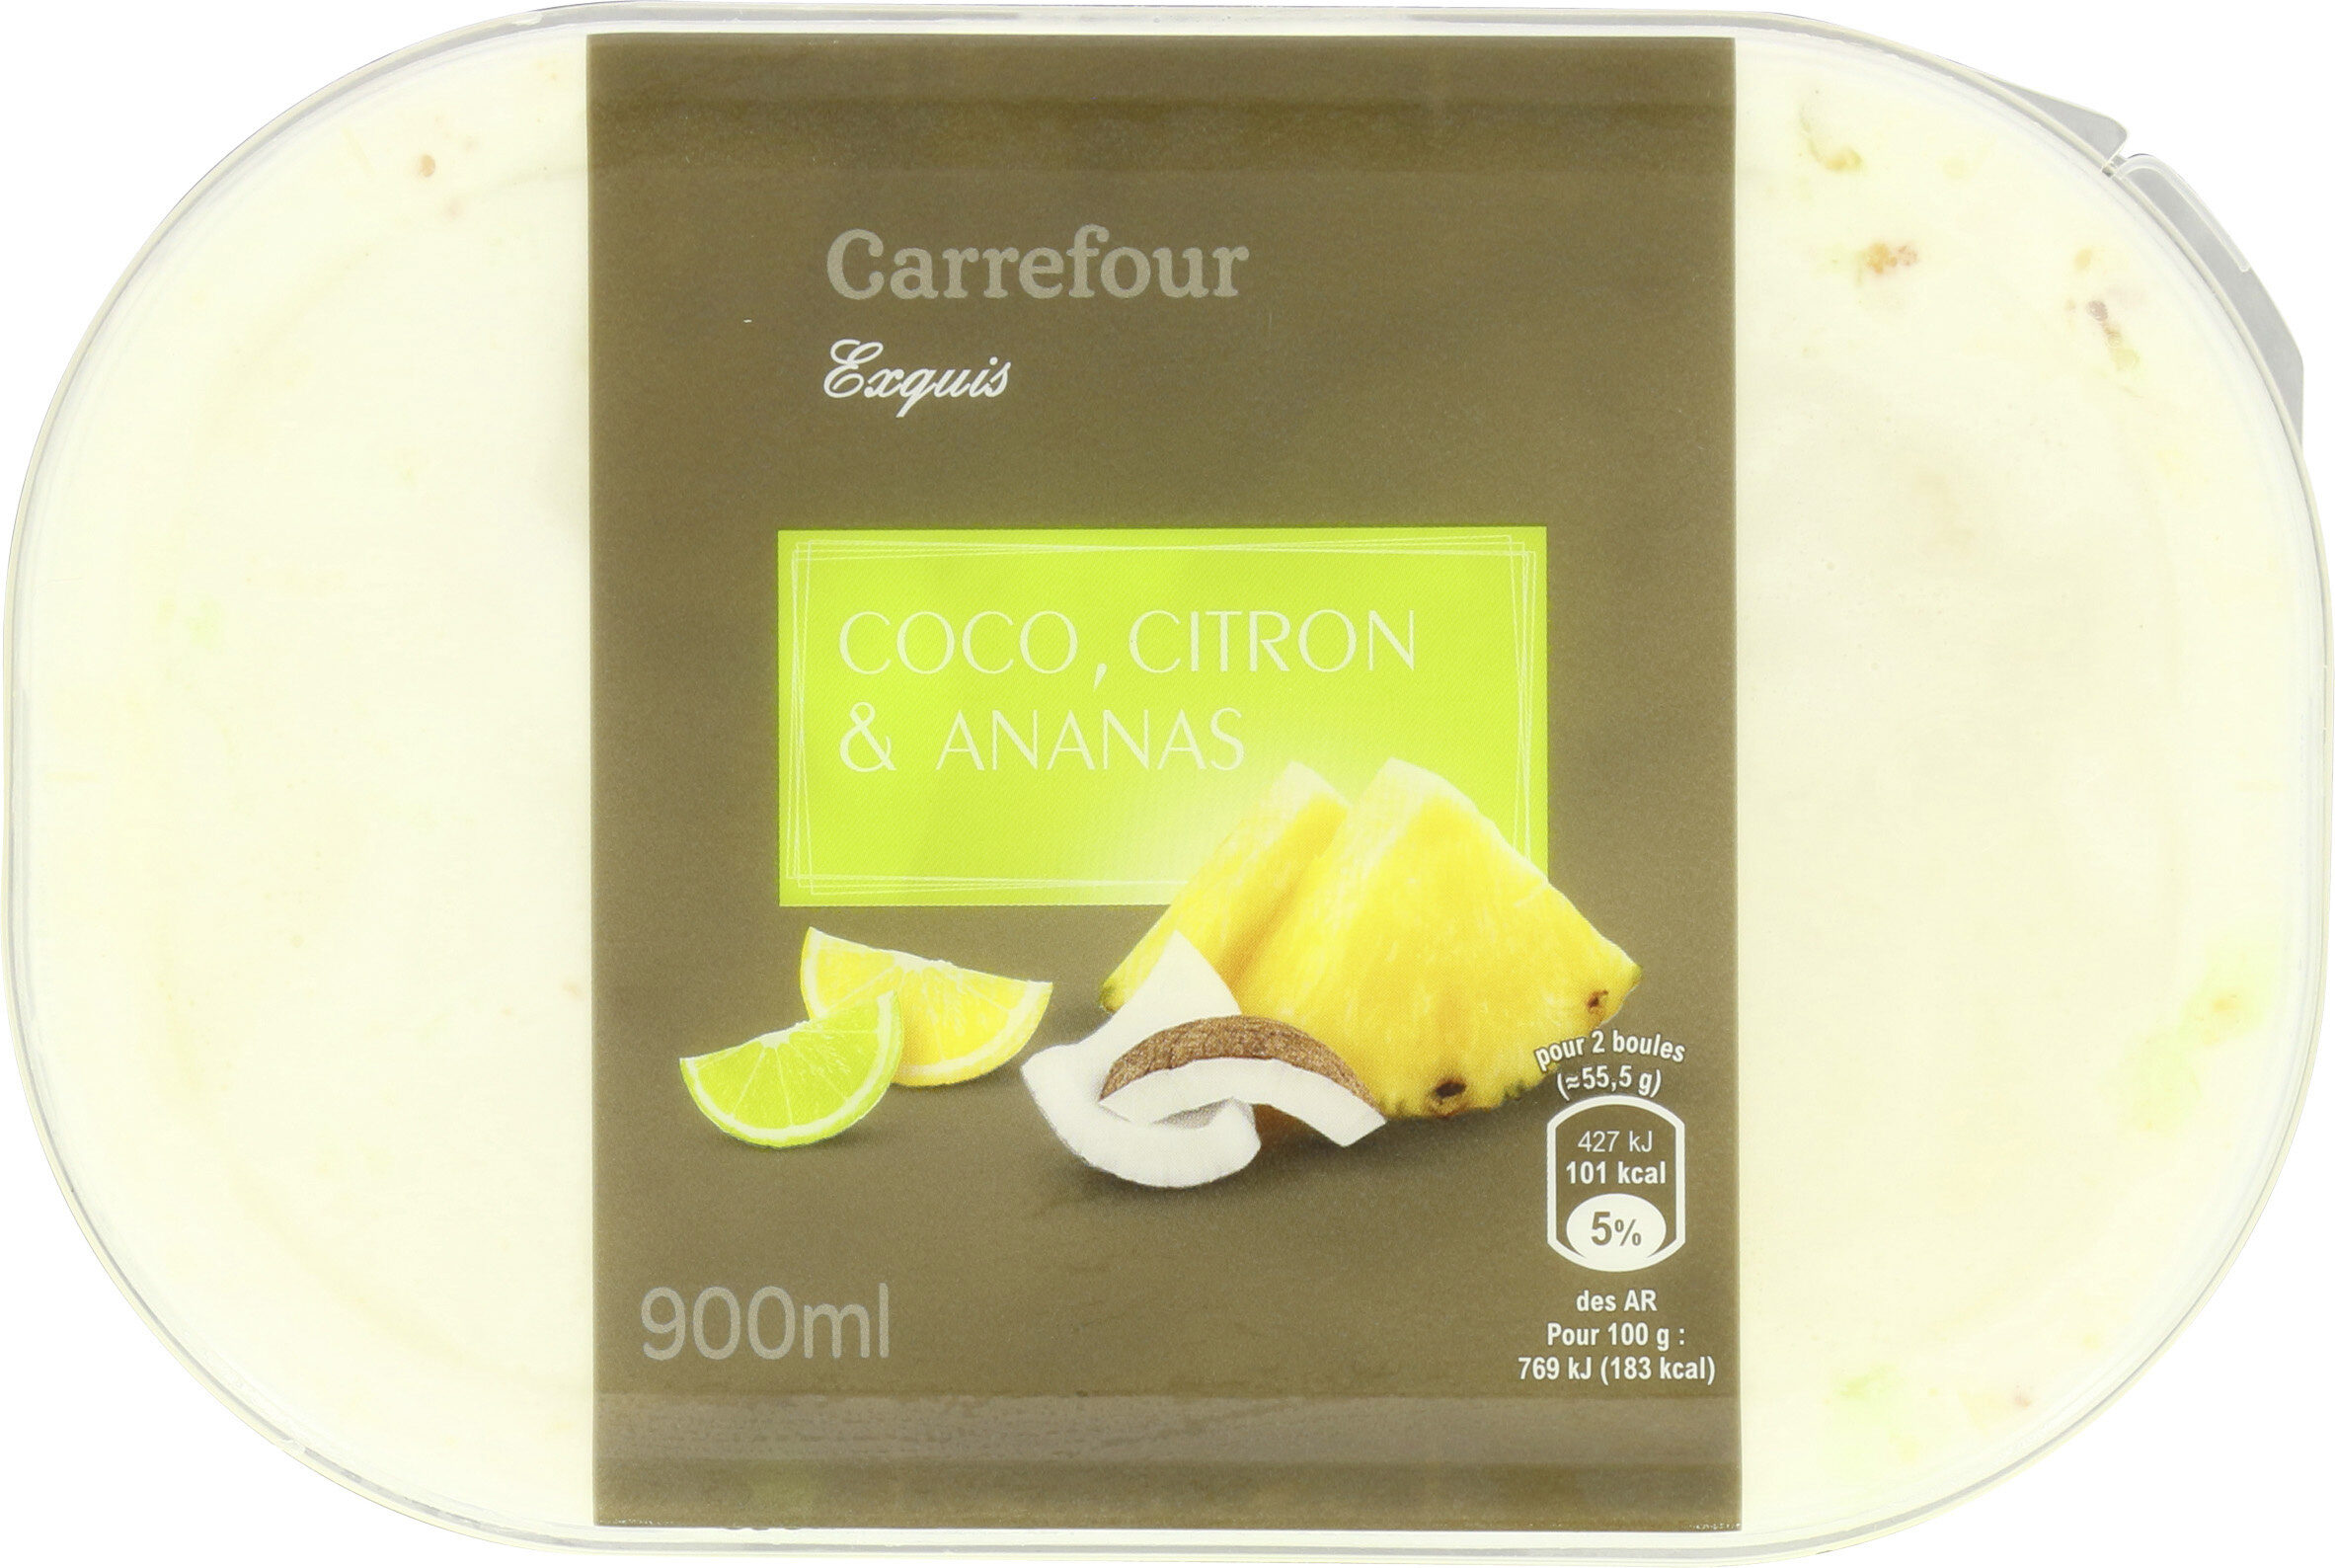 Coco, citron & ananas - Product - fr